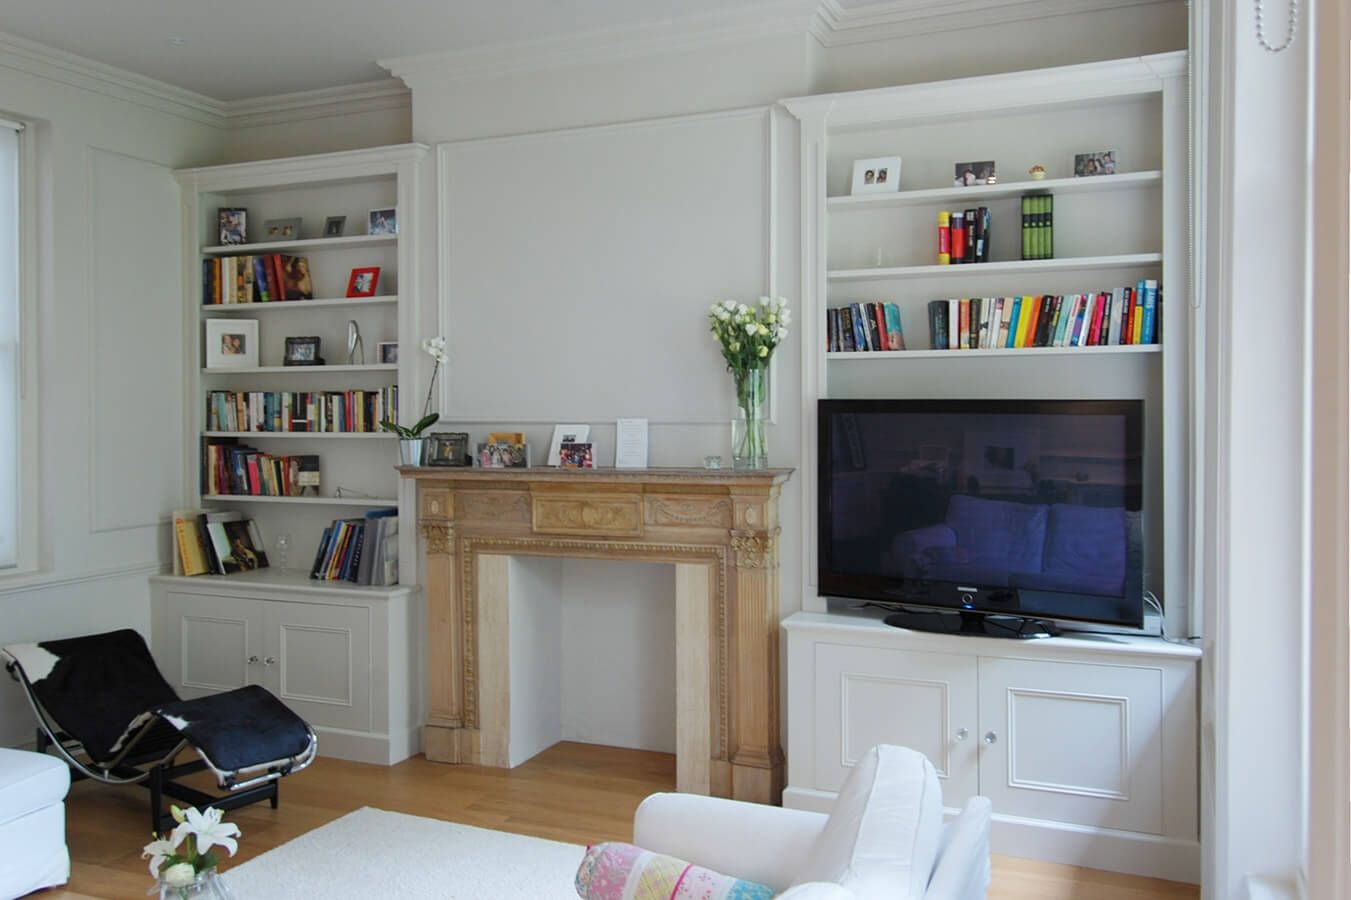 Custom Made Living Rooms Display Tv And Media Units Within Fitted Shelves And Cupboards (View 6 of 12)